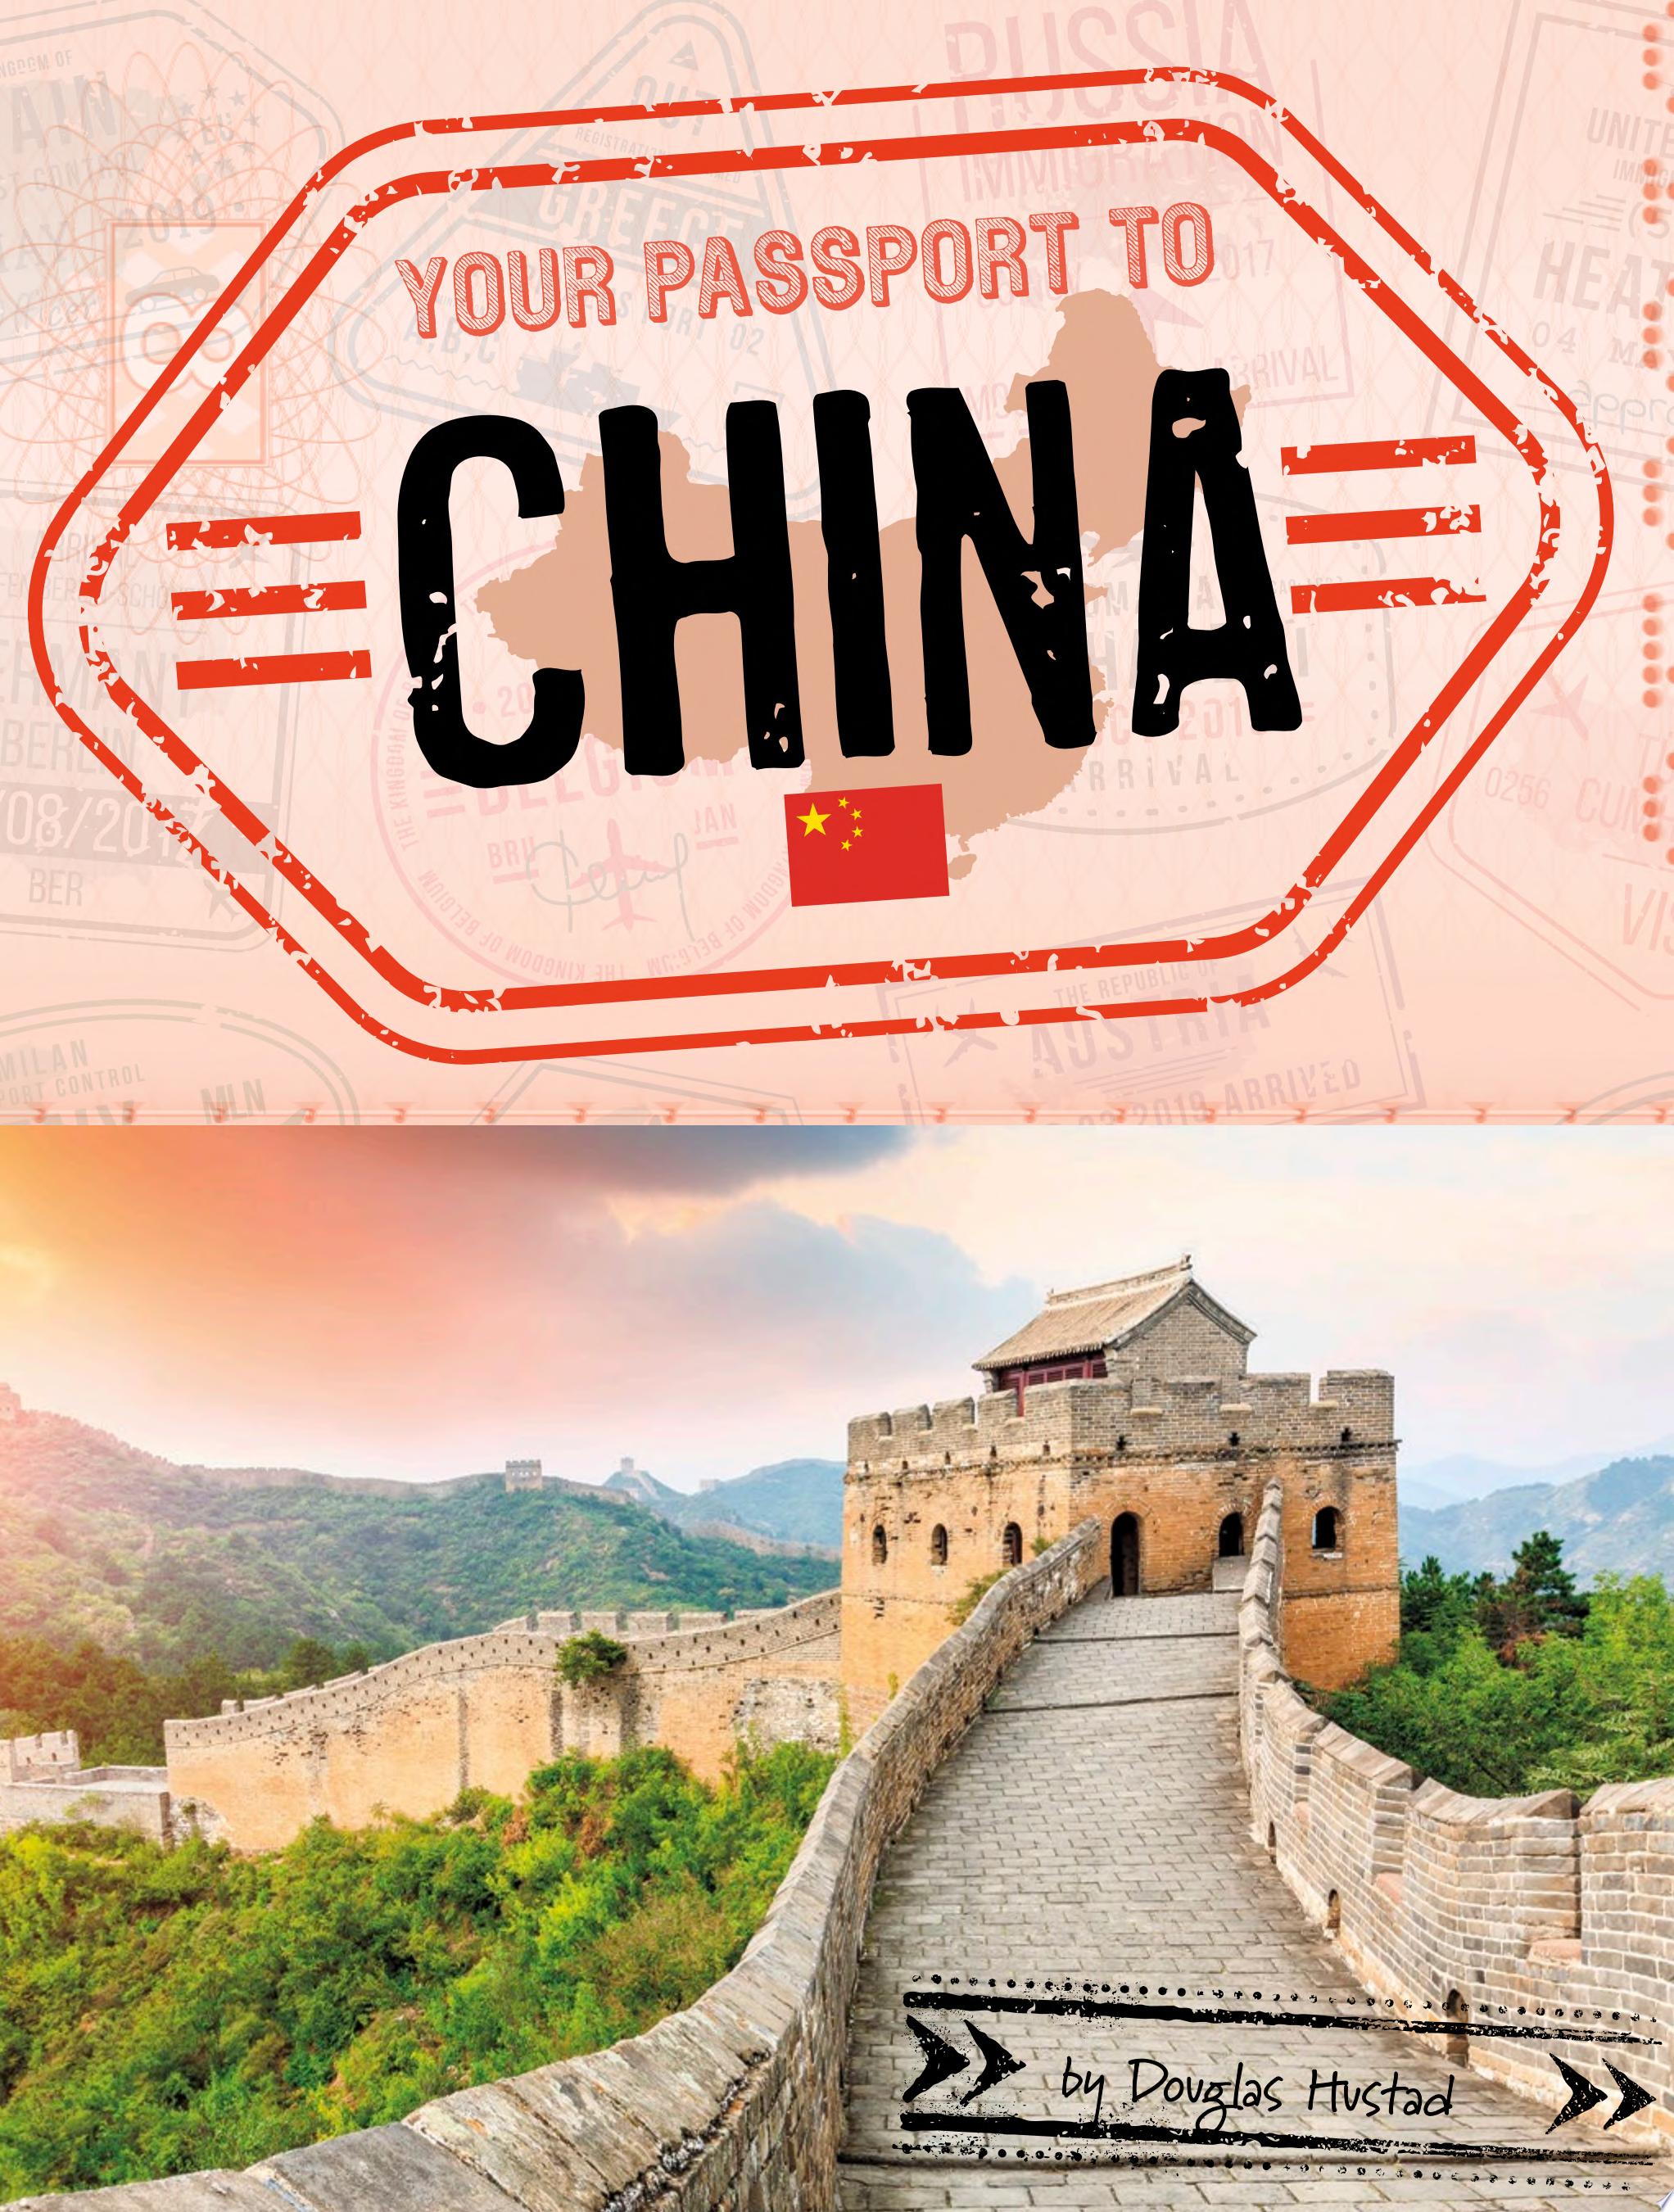 Image for "Your Passport to China"